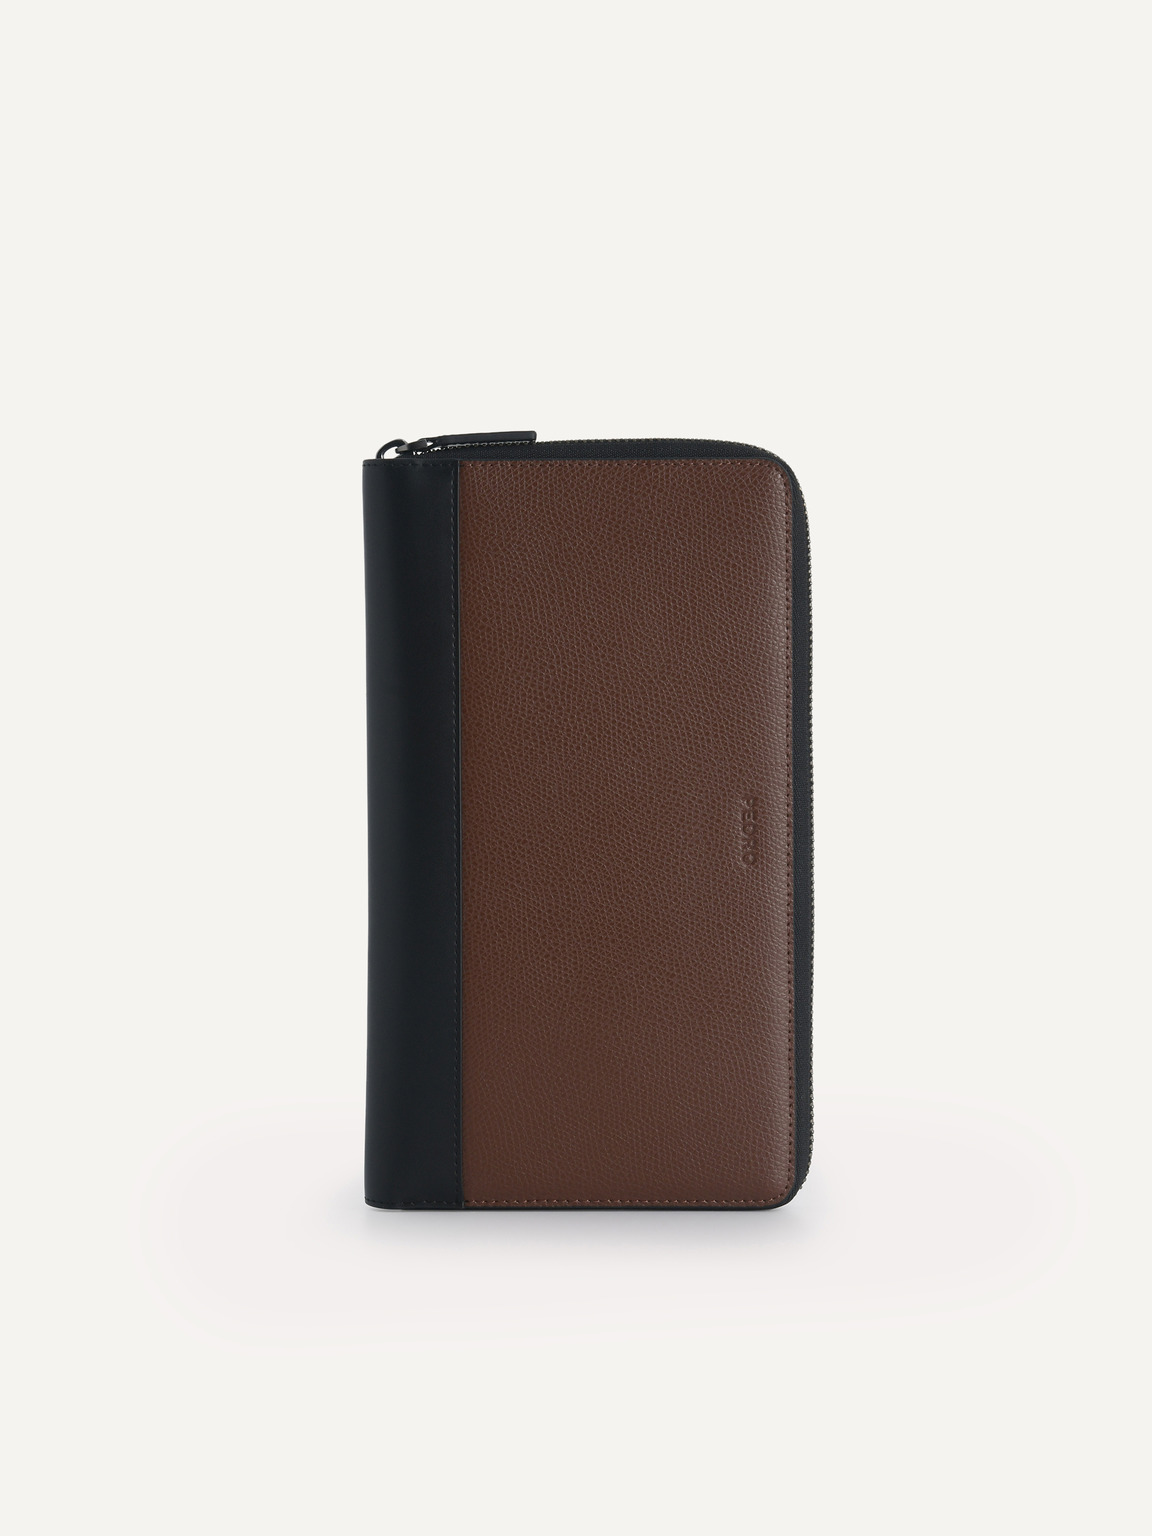 Textured Leather Travel Organiser, Brown